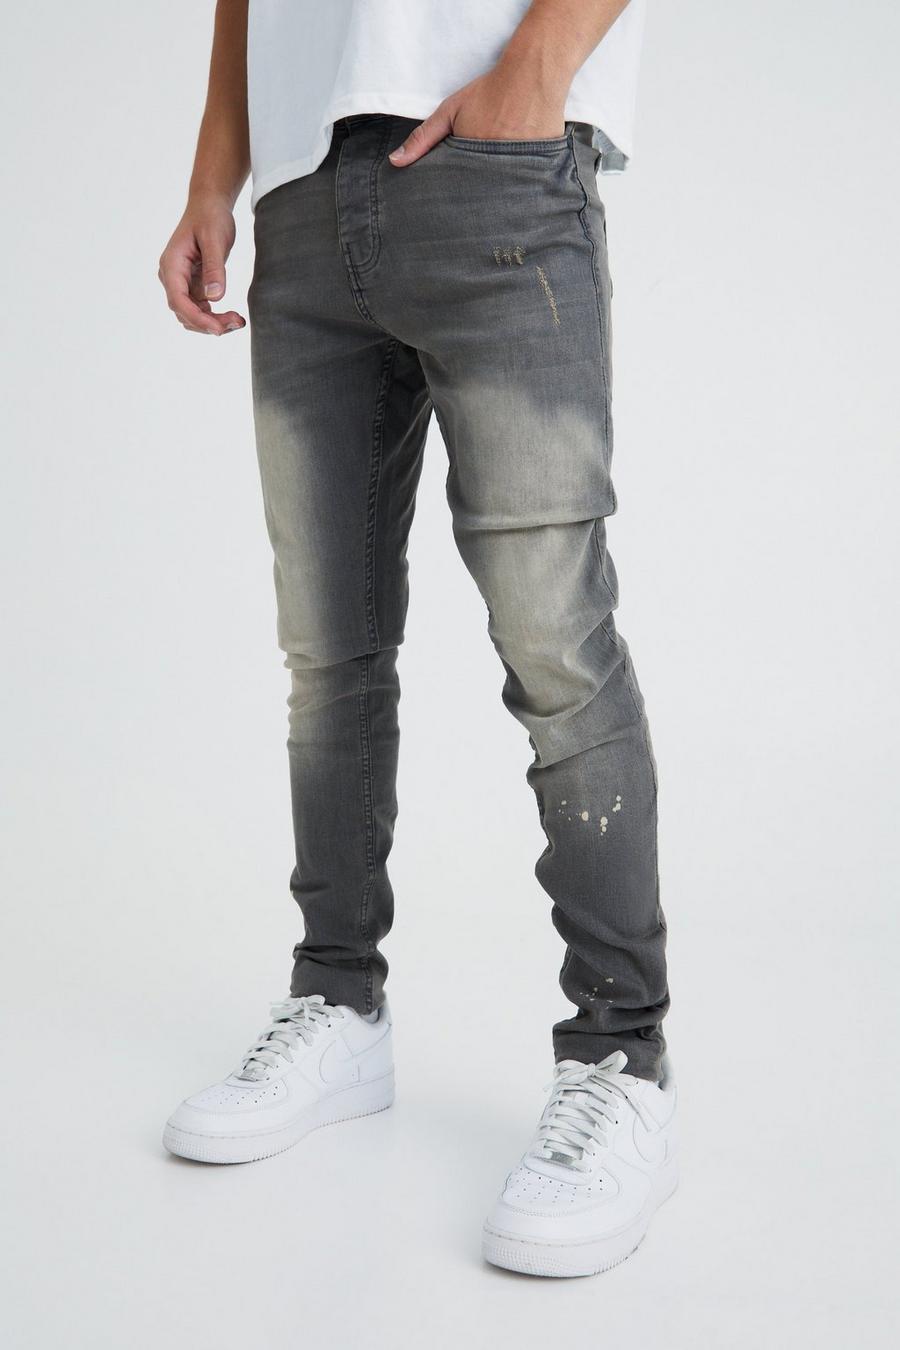 Grey Skinny Stretch Stacked Tinted Jeans